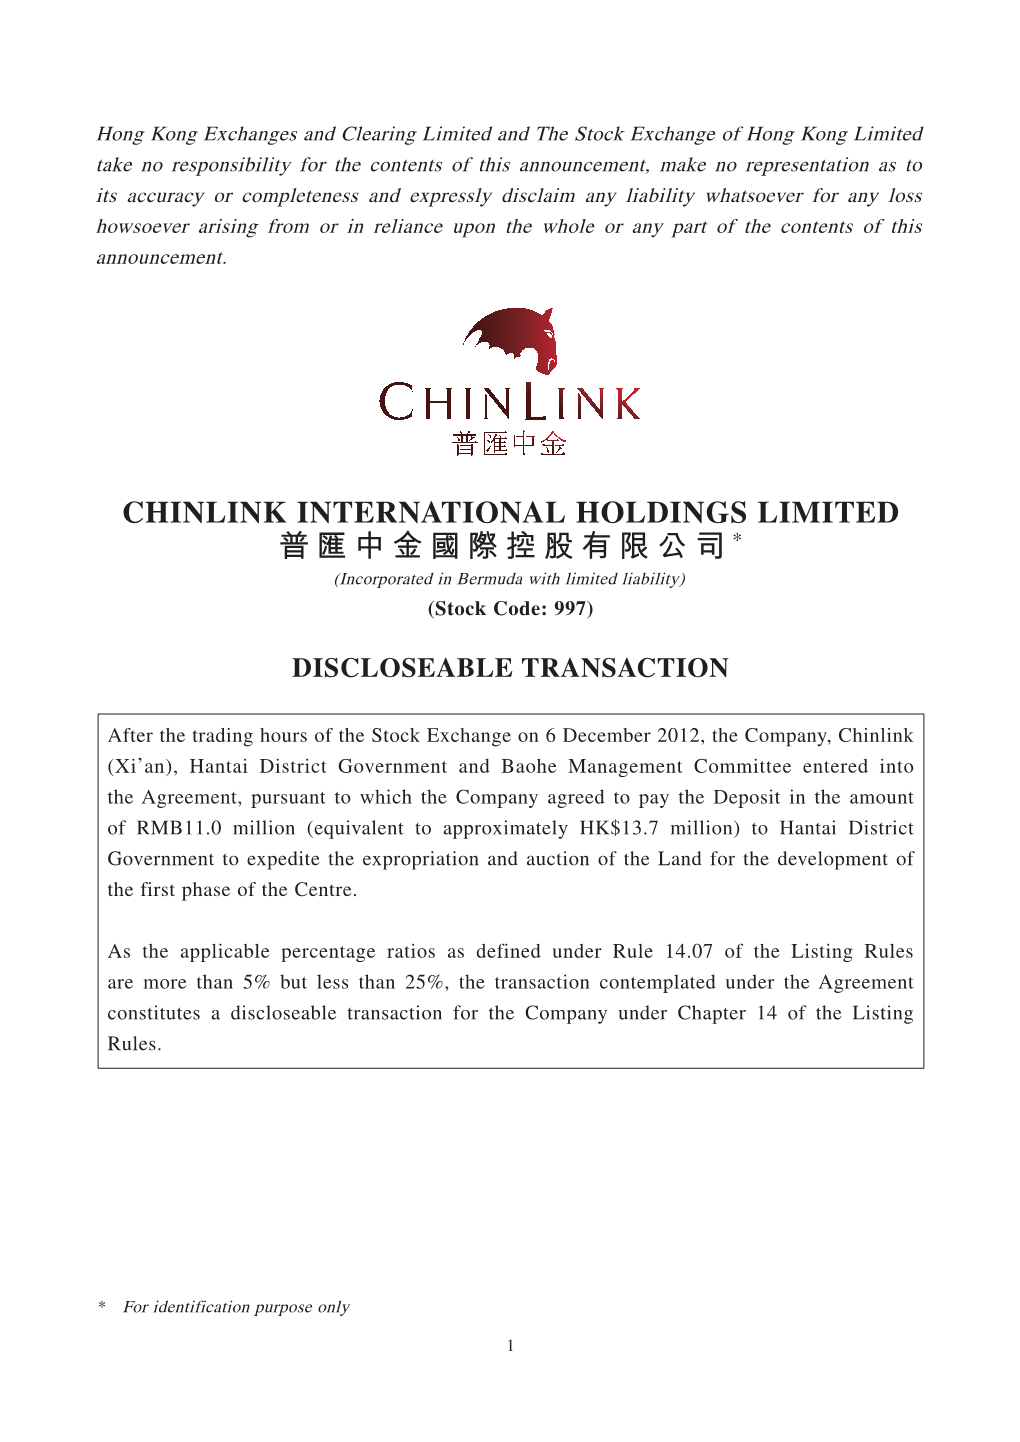 CHINLINK INTERNATIONAL HOLDINGS LIMITED 普匯中金國際控股有限公司* (Incorporated in Bermuda with Limited Liability) (Stock Code: 997)